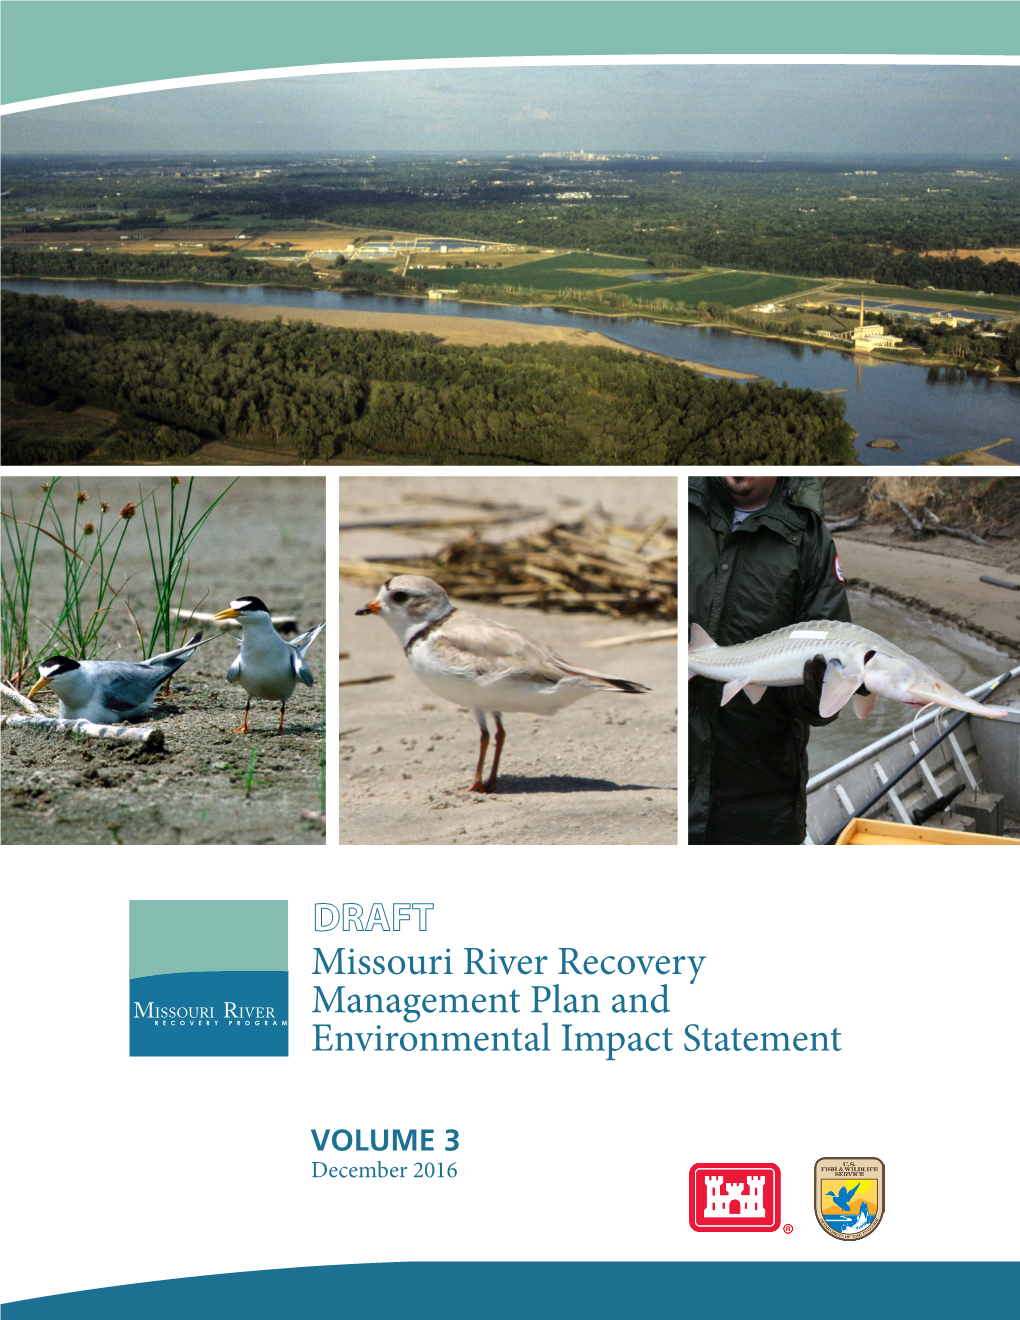 DRAFT Missouri River Recovery Management Plan and Environmental Impact Statement 3-261 Flood Risk Management and Interior Drainage Billion